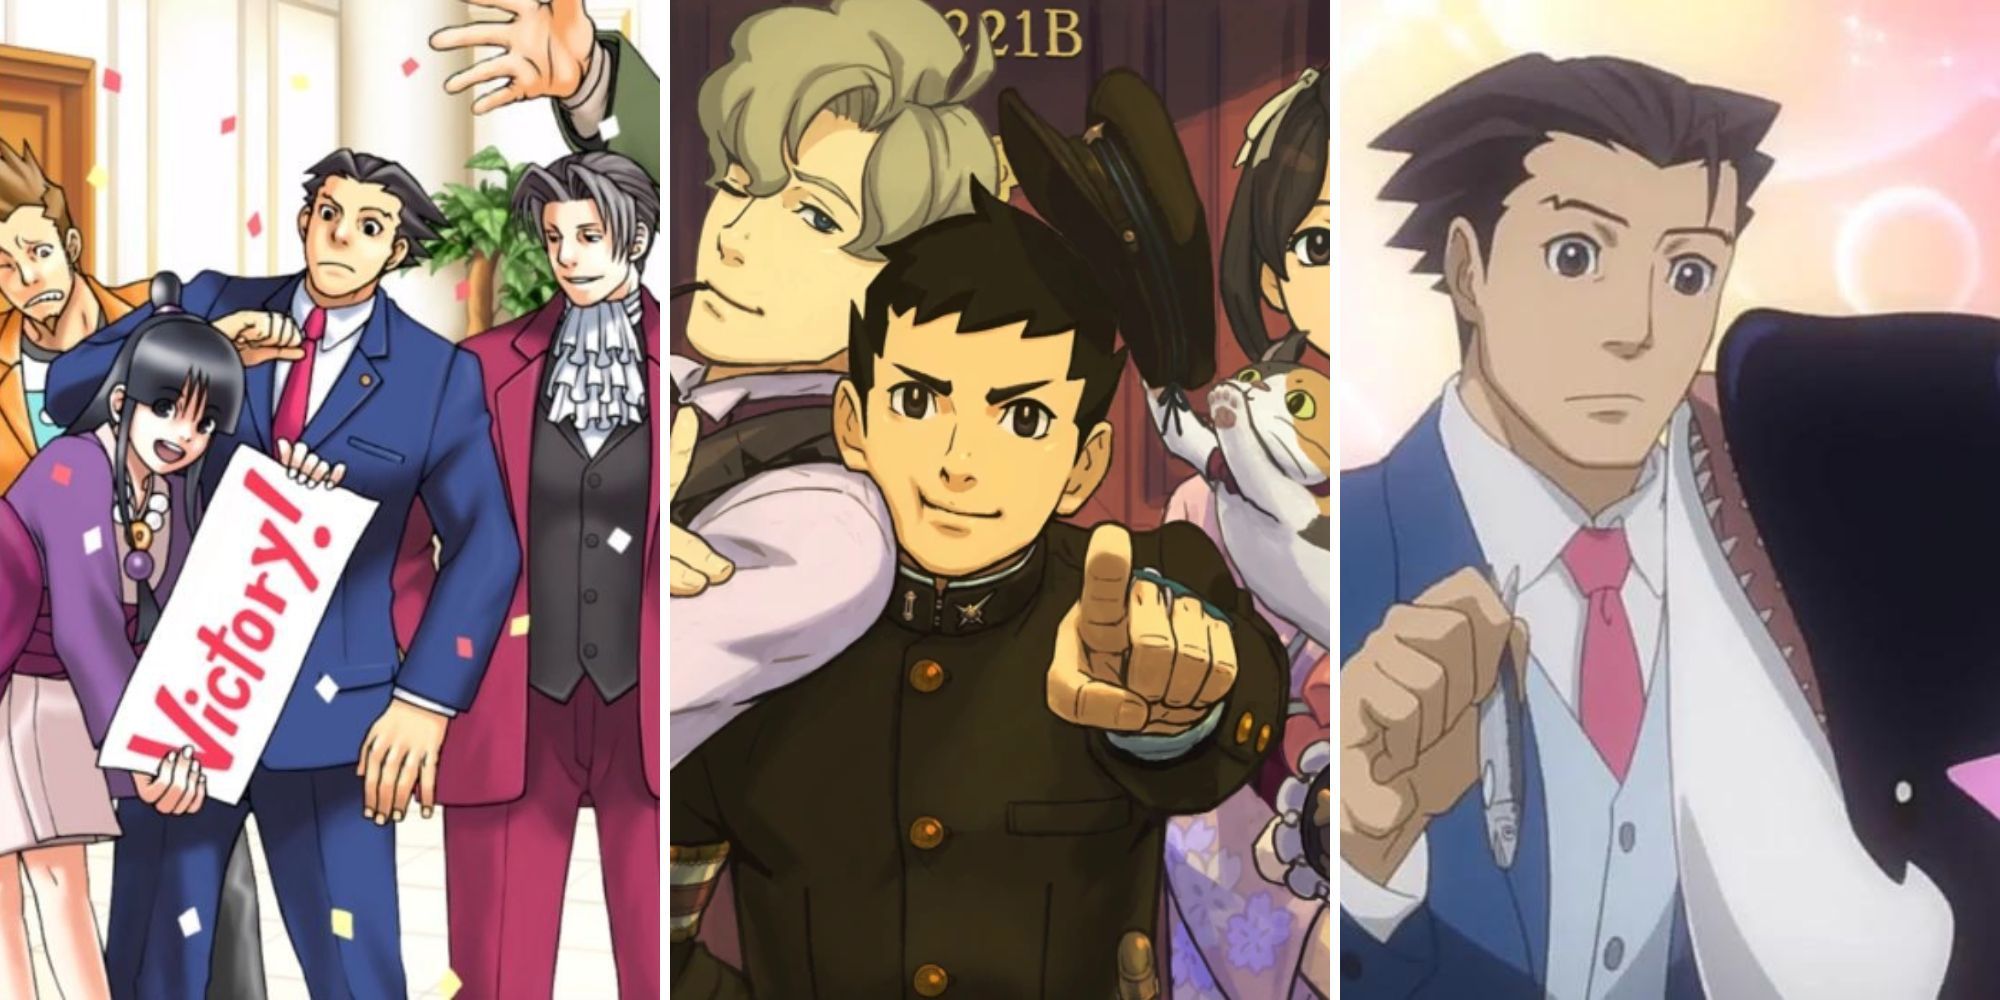 Phoenix Wright celebrates with Maya and Miles, Herlock Sholmes and Ryunosuke pose, Phoenix is licked by an whale